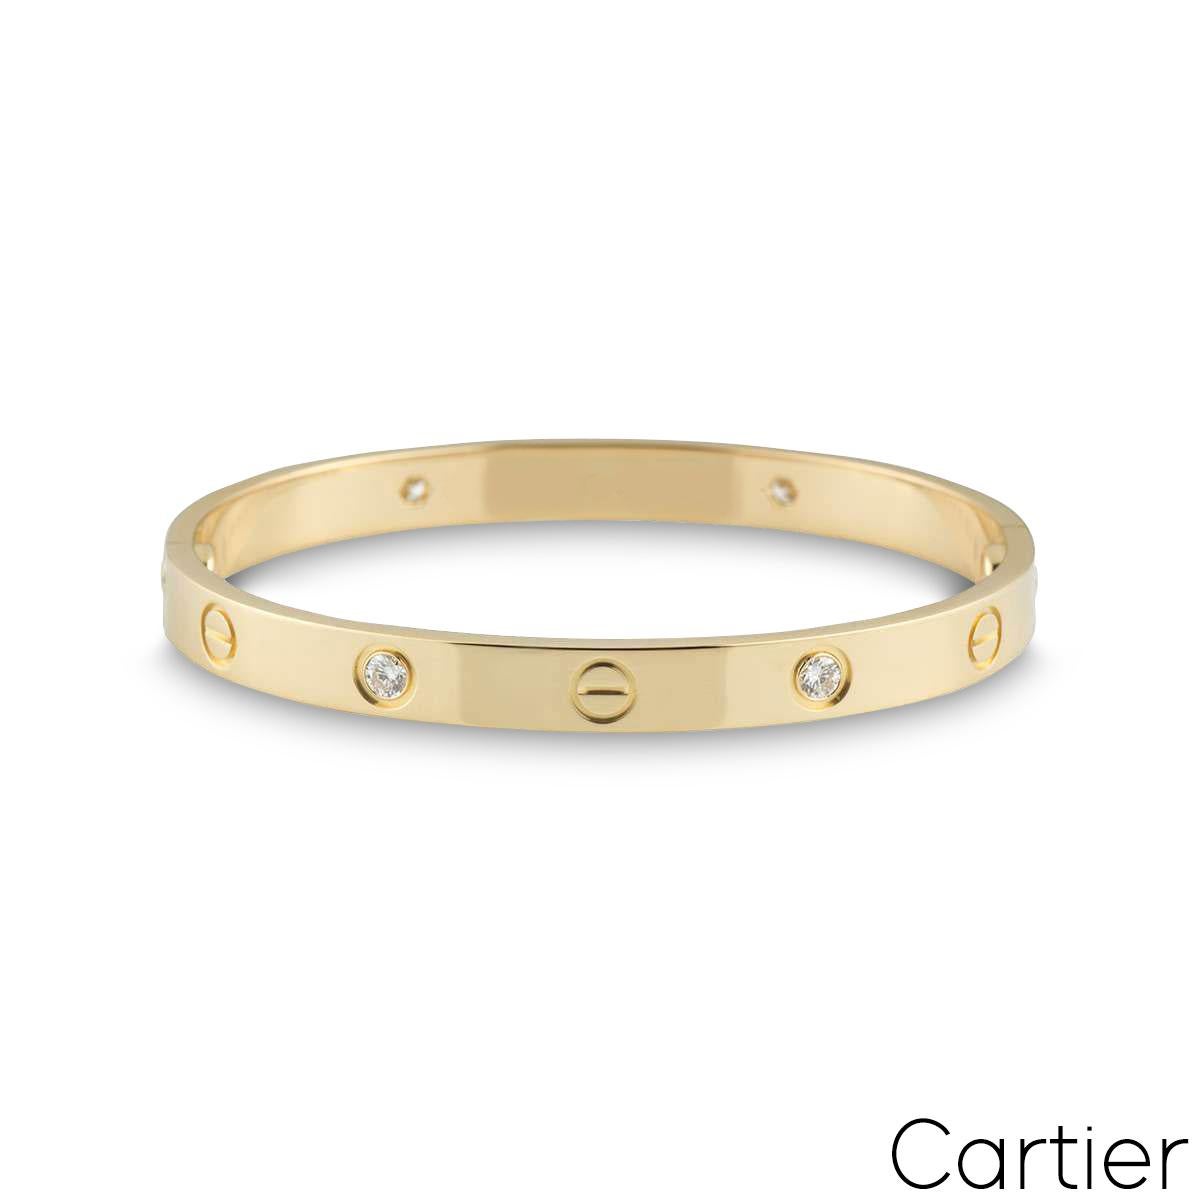 An iconic 18k yellow gold, Cartier half diamond bracelet from the Love collection. The bracelet comprises of the screw motif design alternating with four round brilliant cut diamonds in a rubover setting with a weight of 0.42ct. A size 19 and